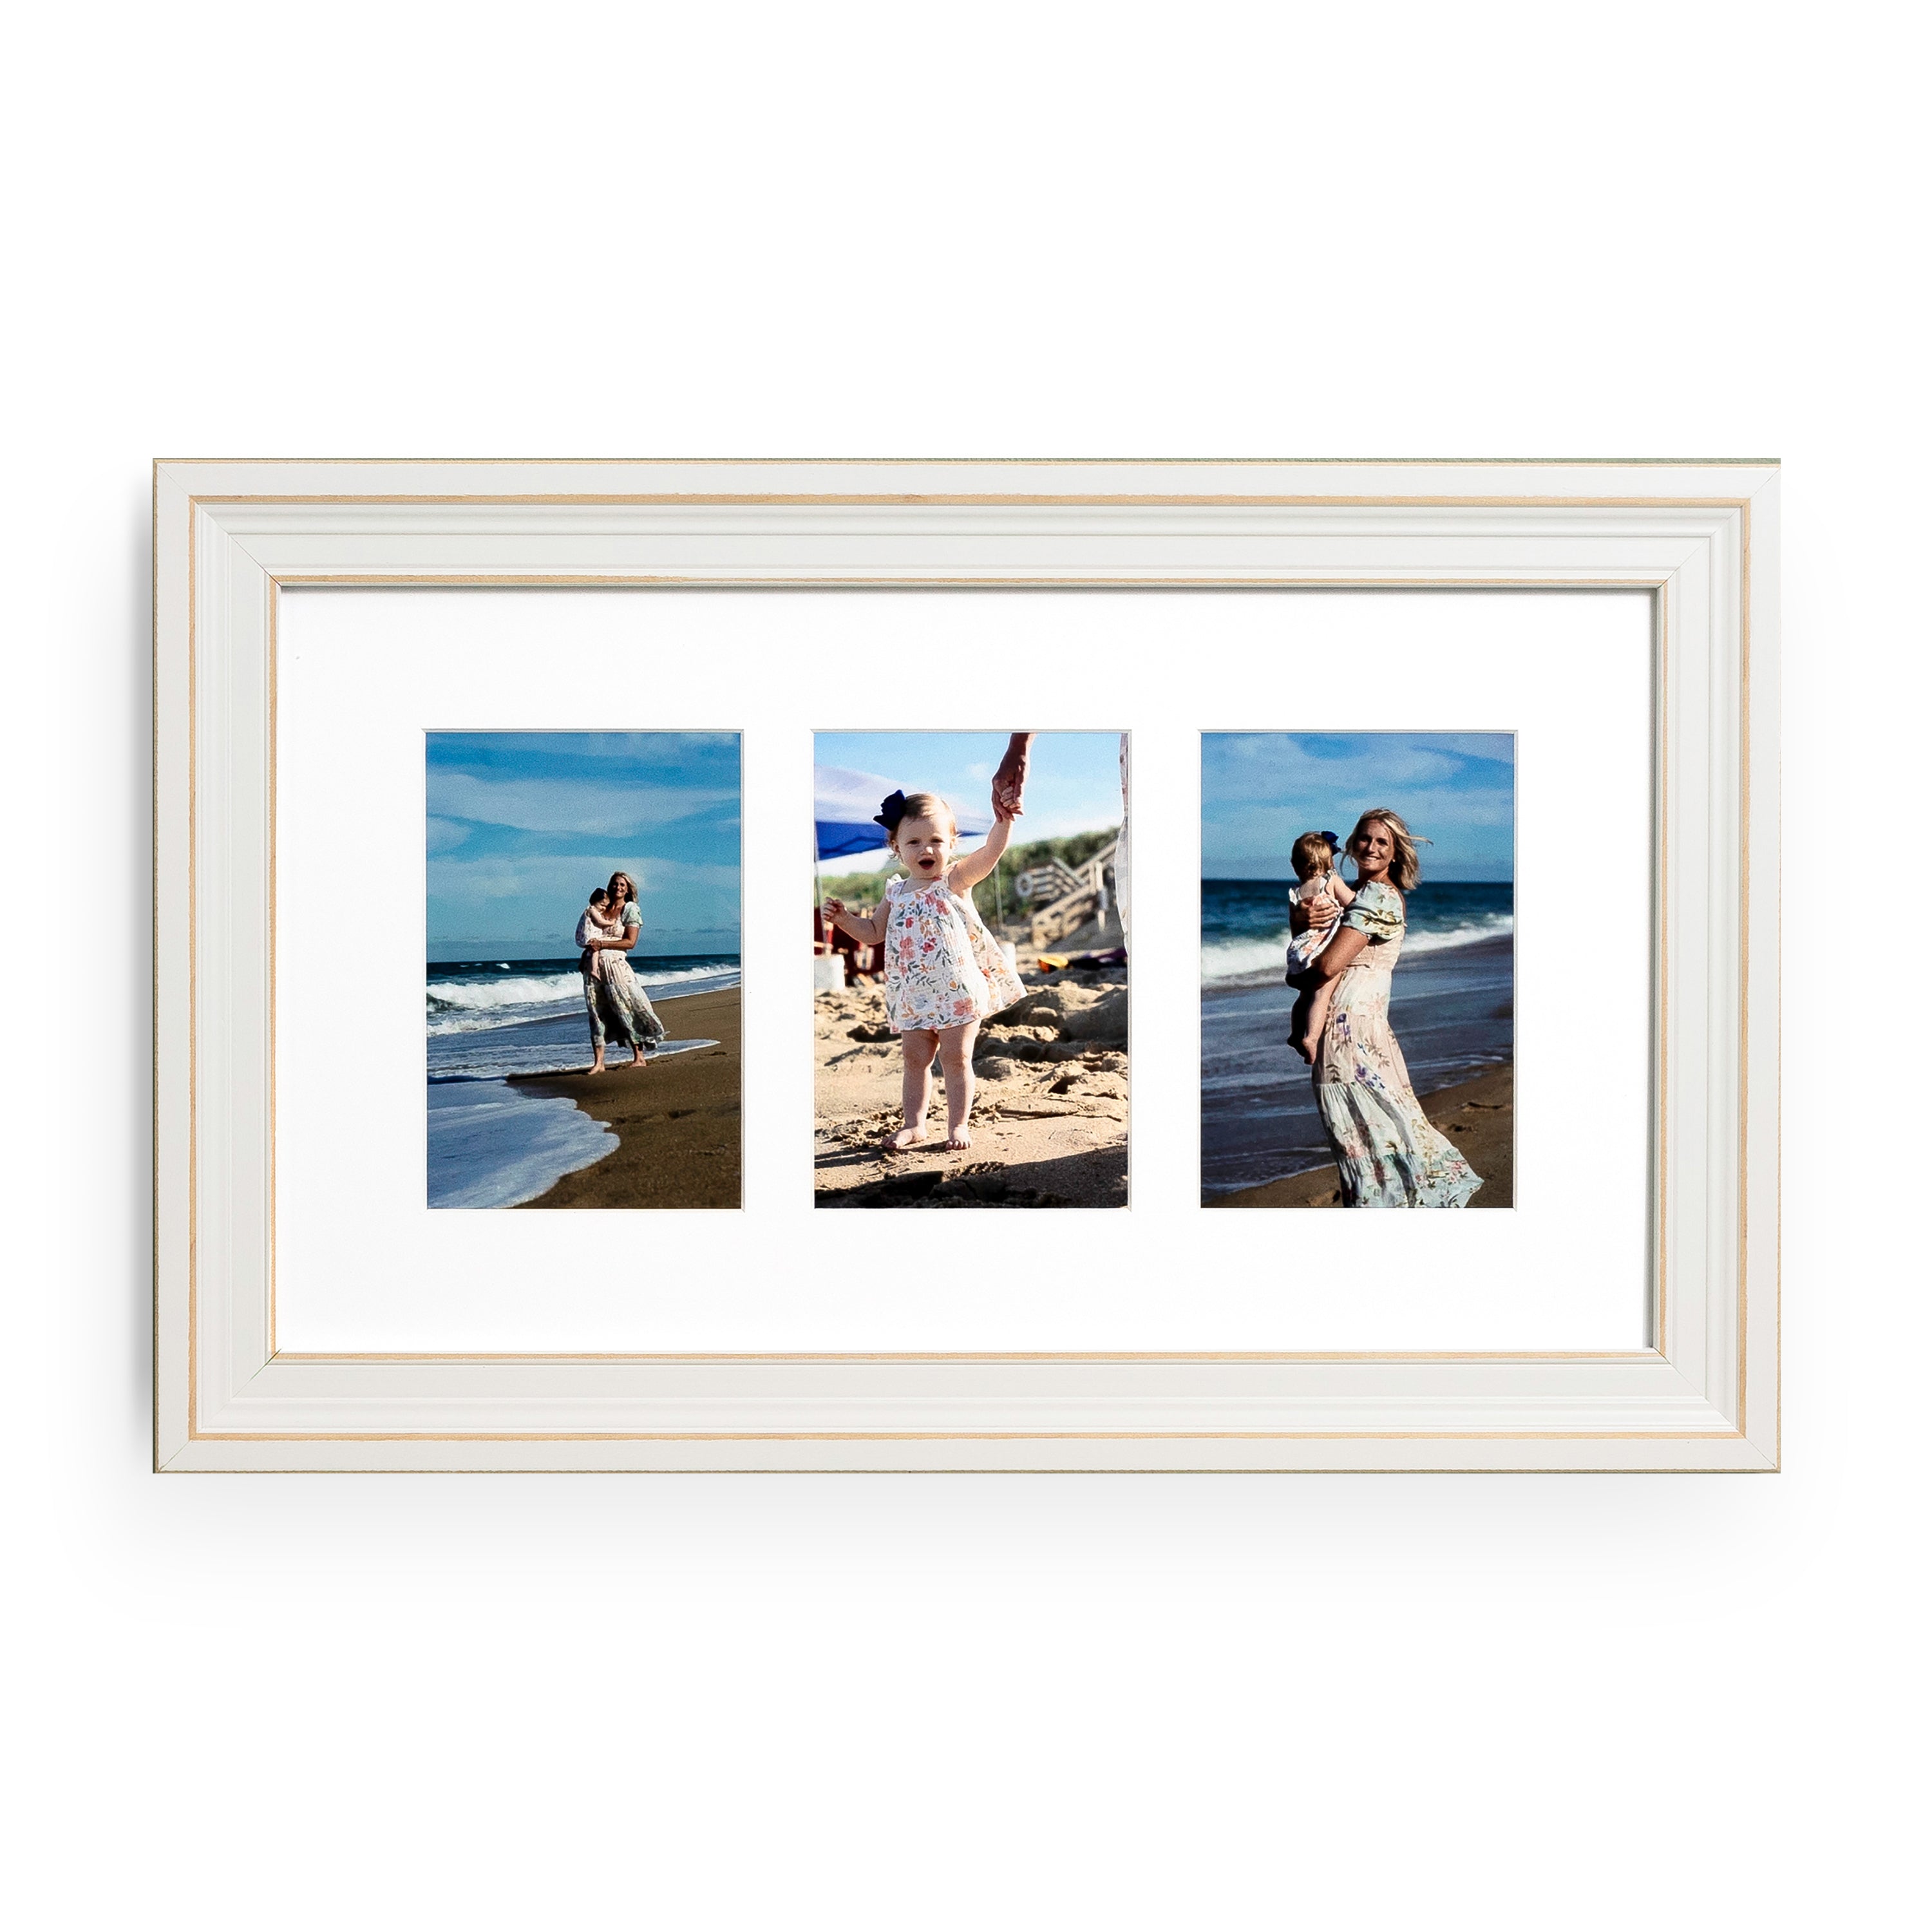 Lawrence Frames 4x6 White Wash Maple Picture Frame